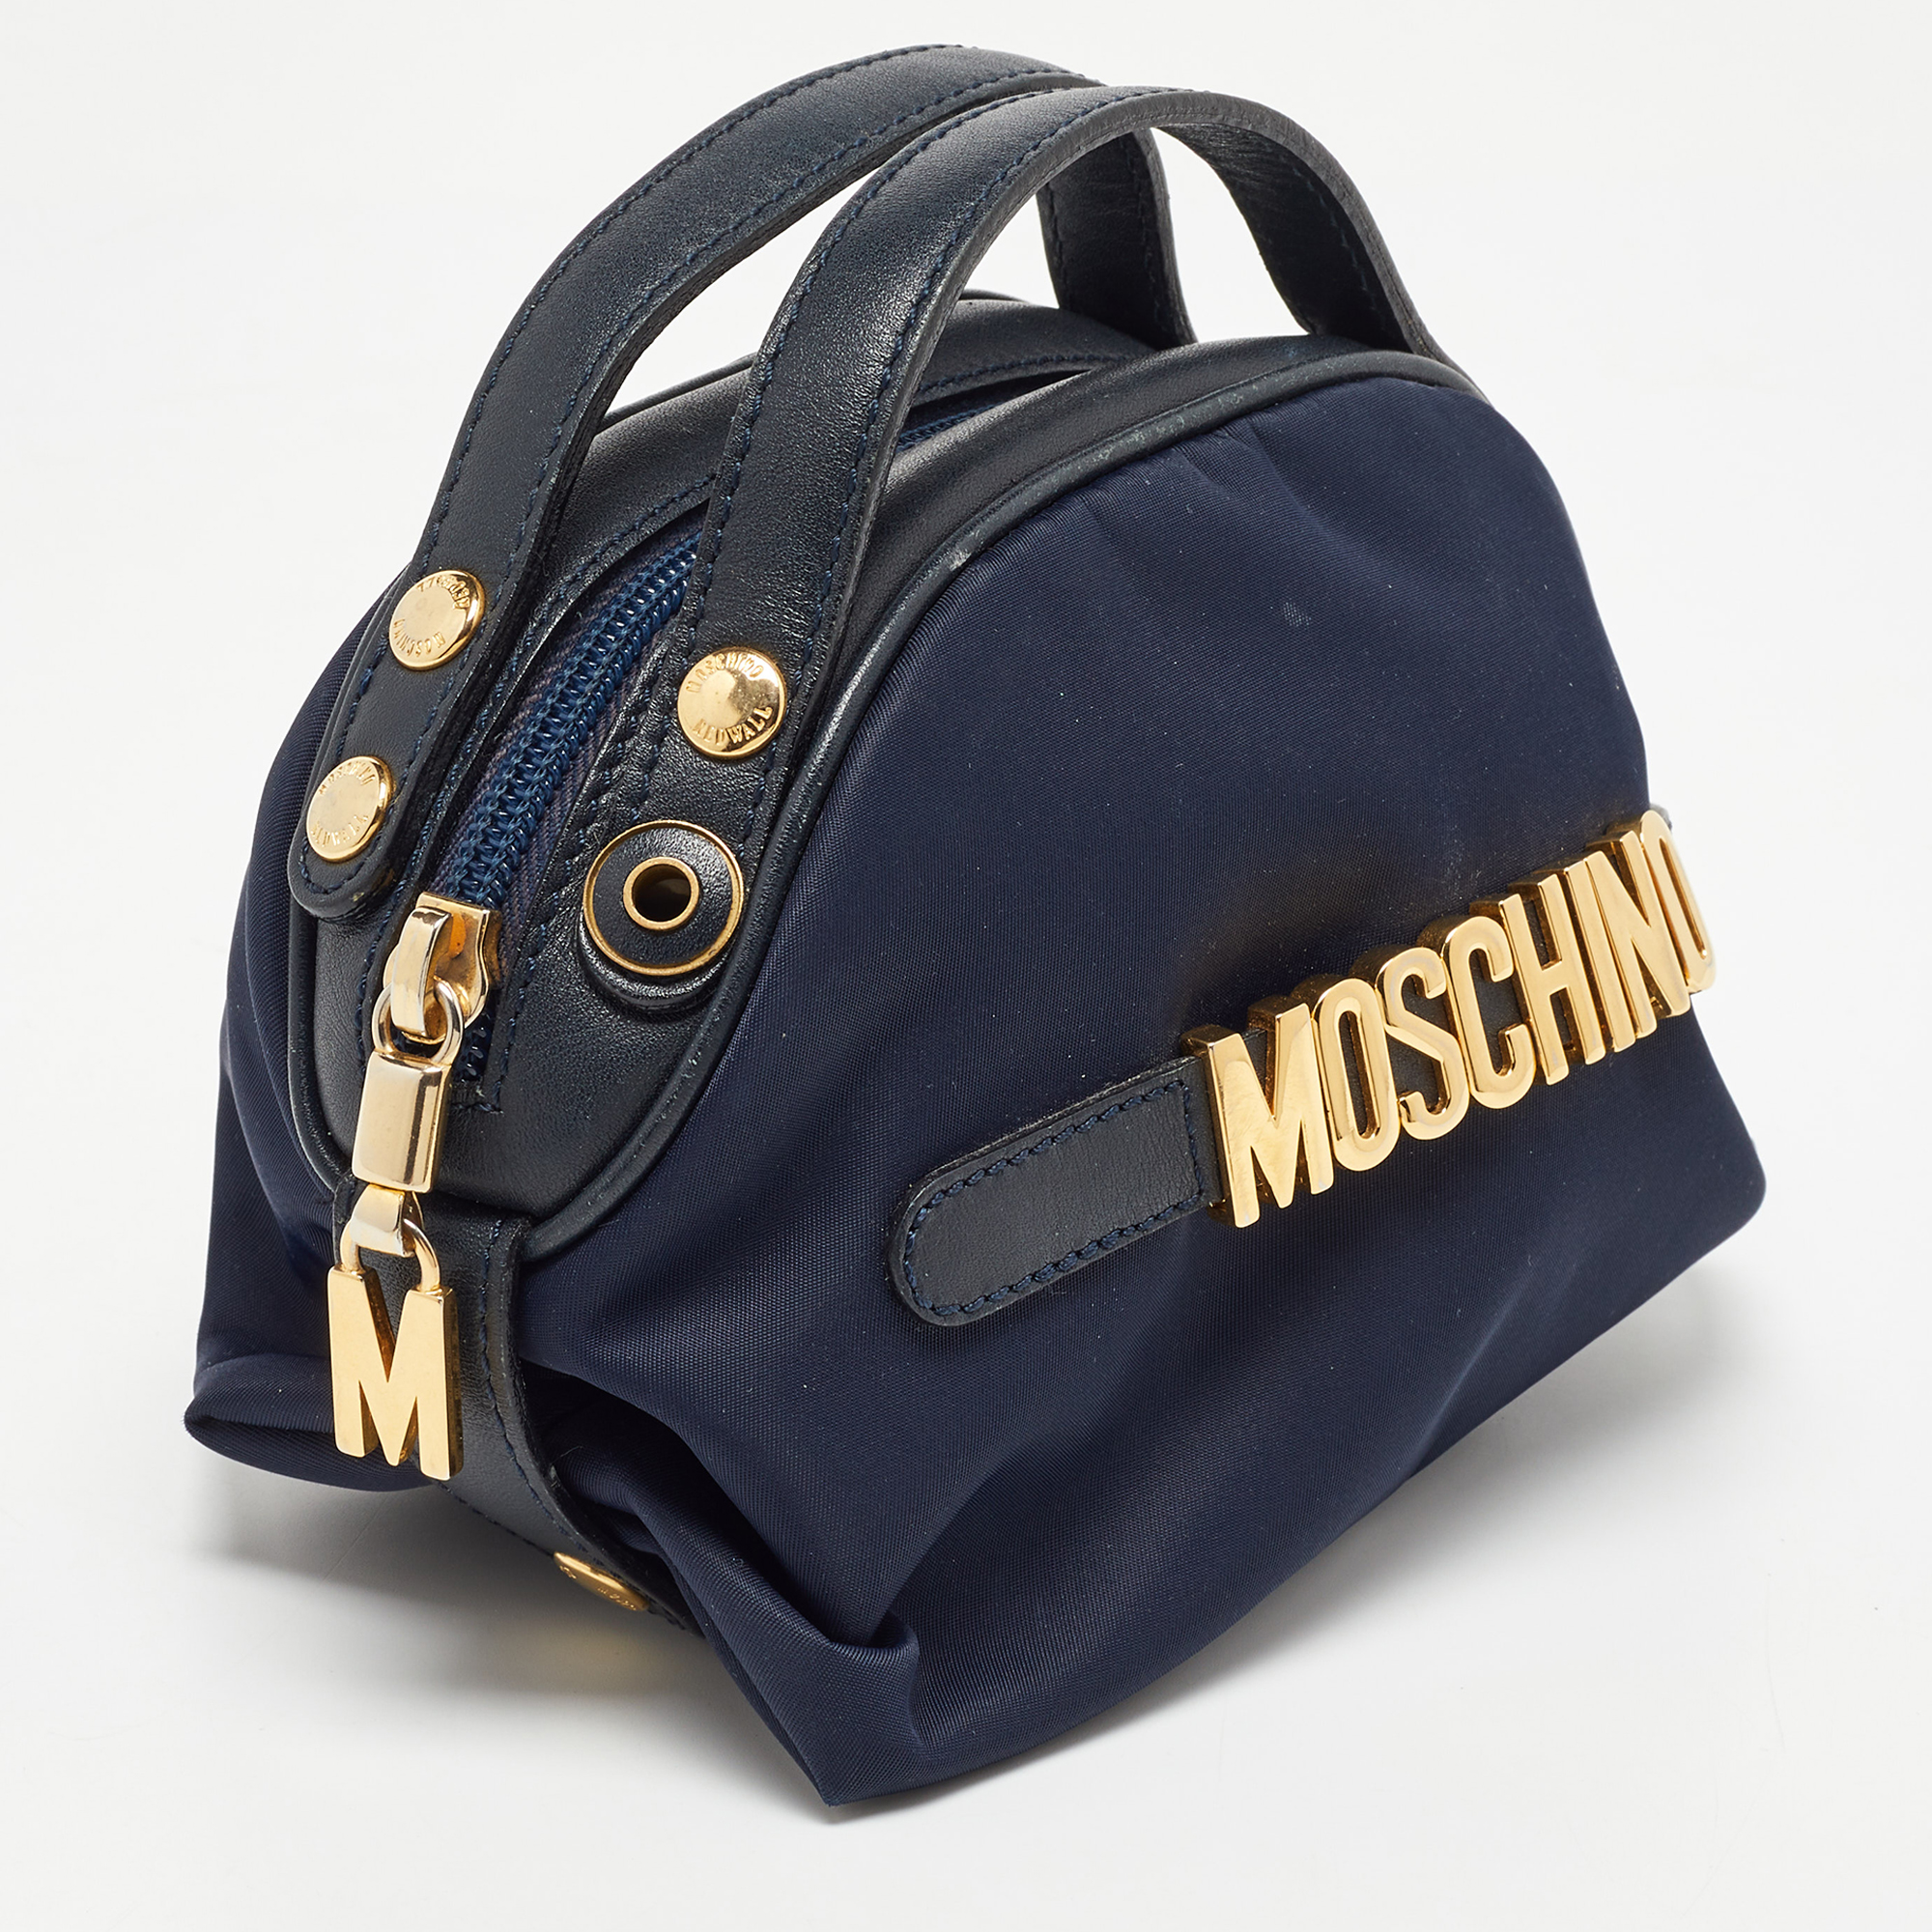 Moschino Blue Nylon And Leather Baguette Bag